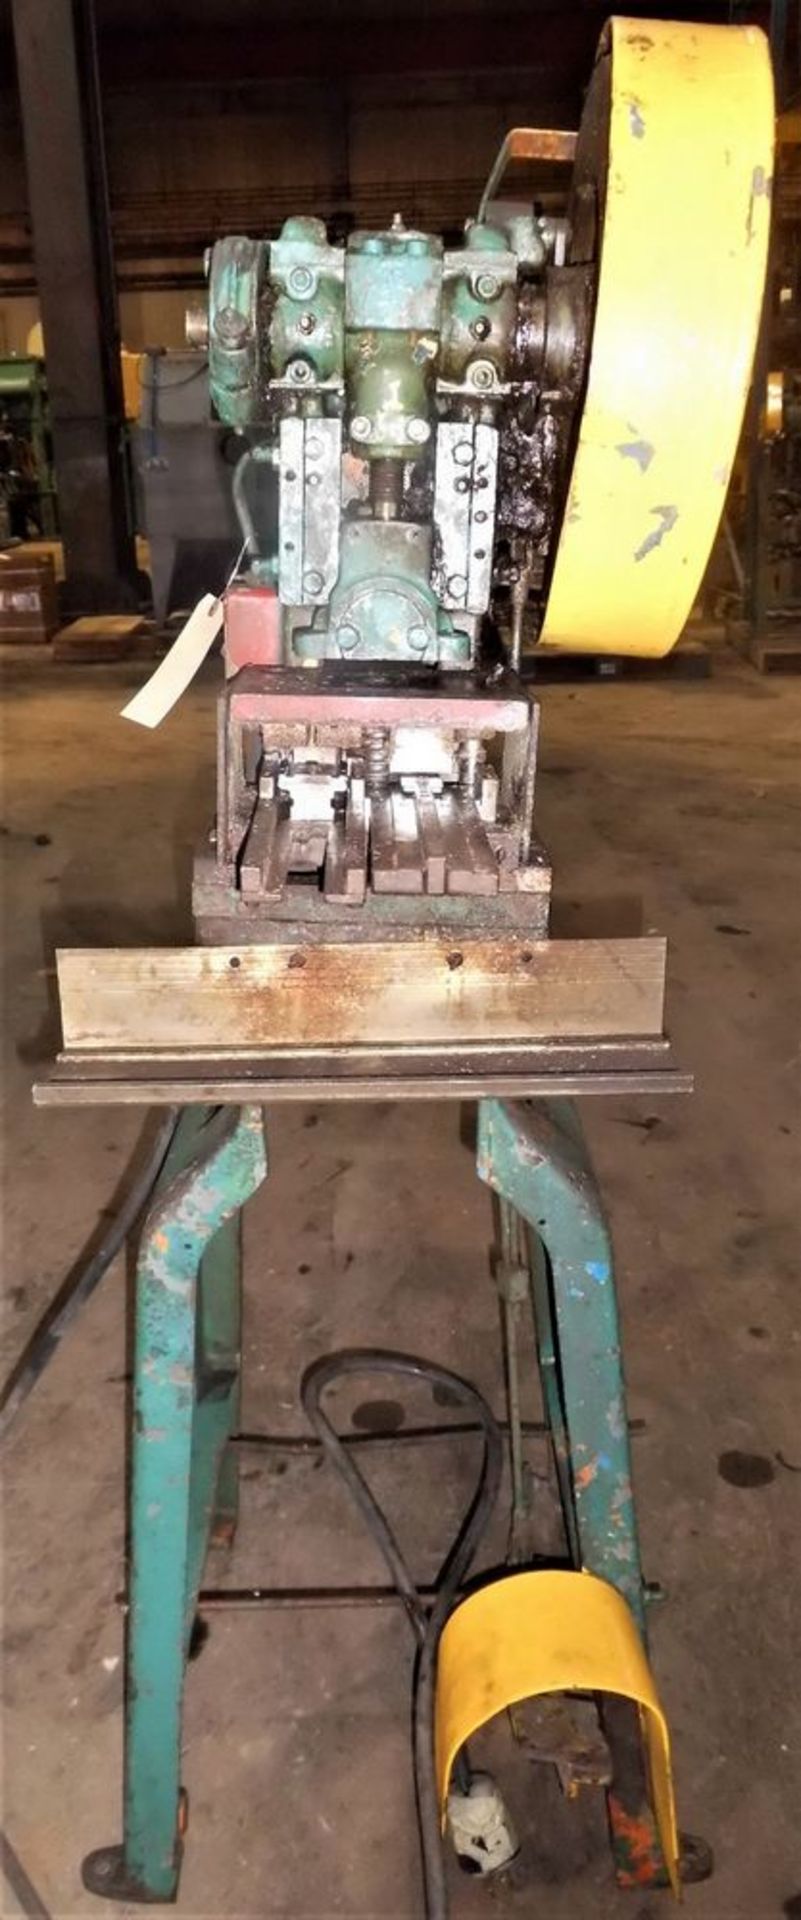 Famco OBI Punch Press 4.5 Ton x 9'' x 6 1/4''. LOADING FEE FOR THIS LOT: $100